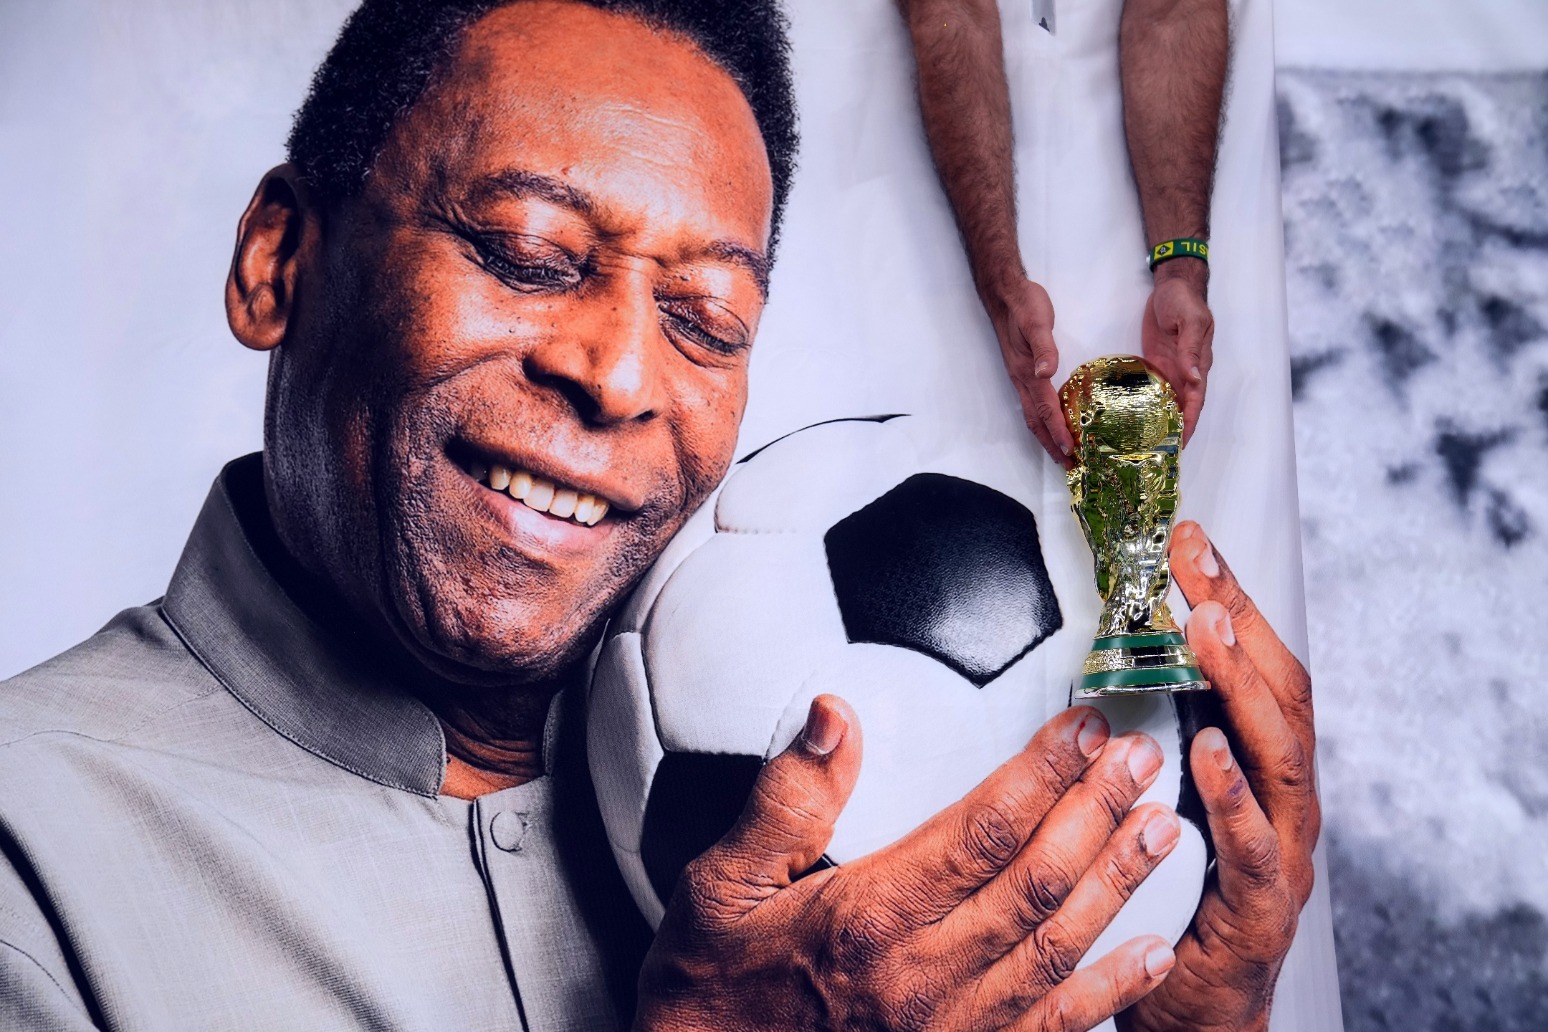 Pele says he is ‘strong with a lot of hope’ amid health concerns 